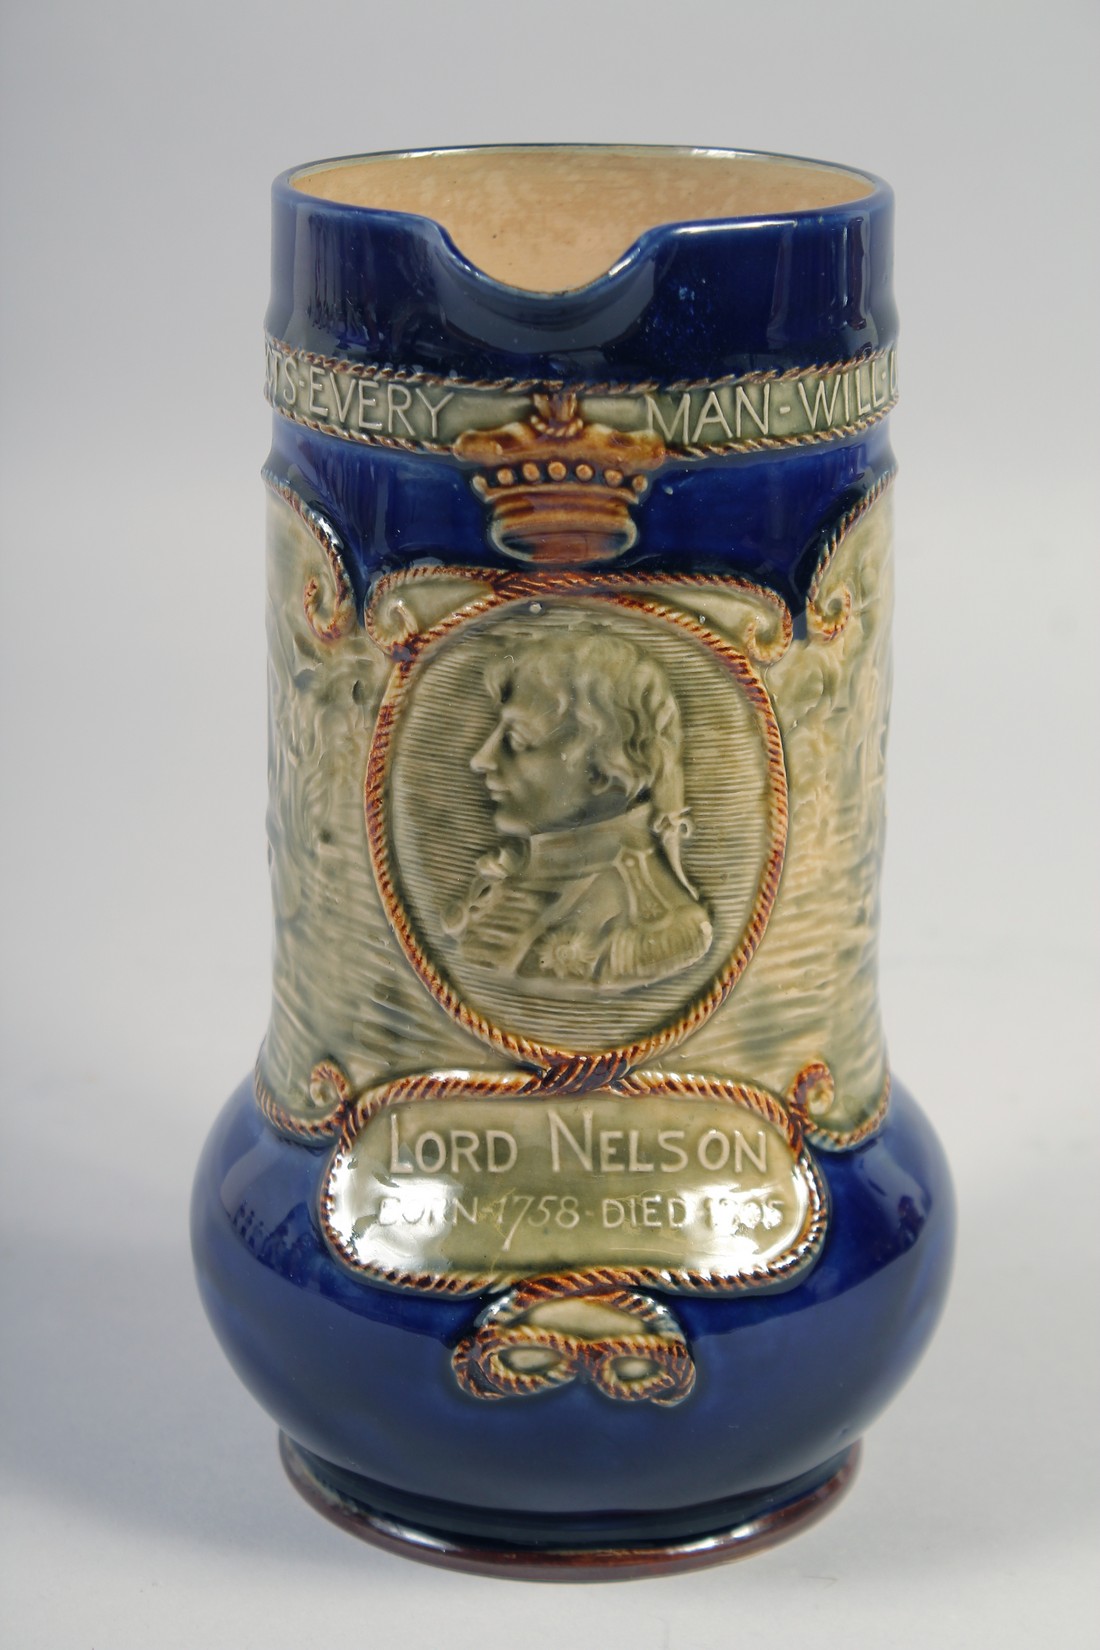 A ROYAL DOULTON STONEWARE JUG, "Lord Nelson born 1758 died 1805", 8". - Image 2 of 7